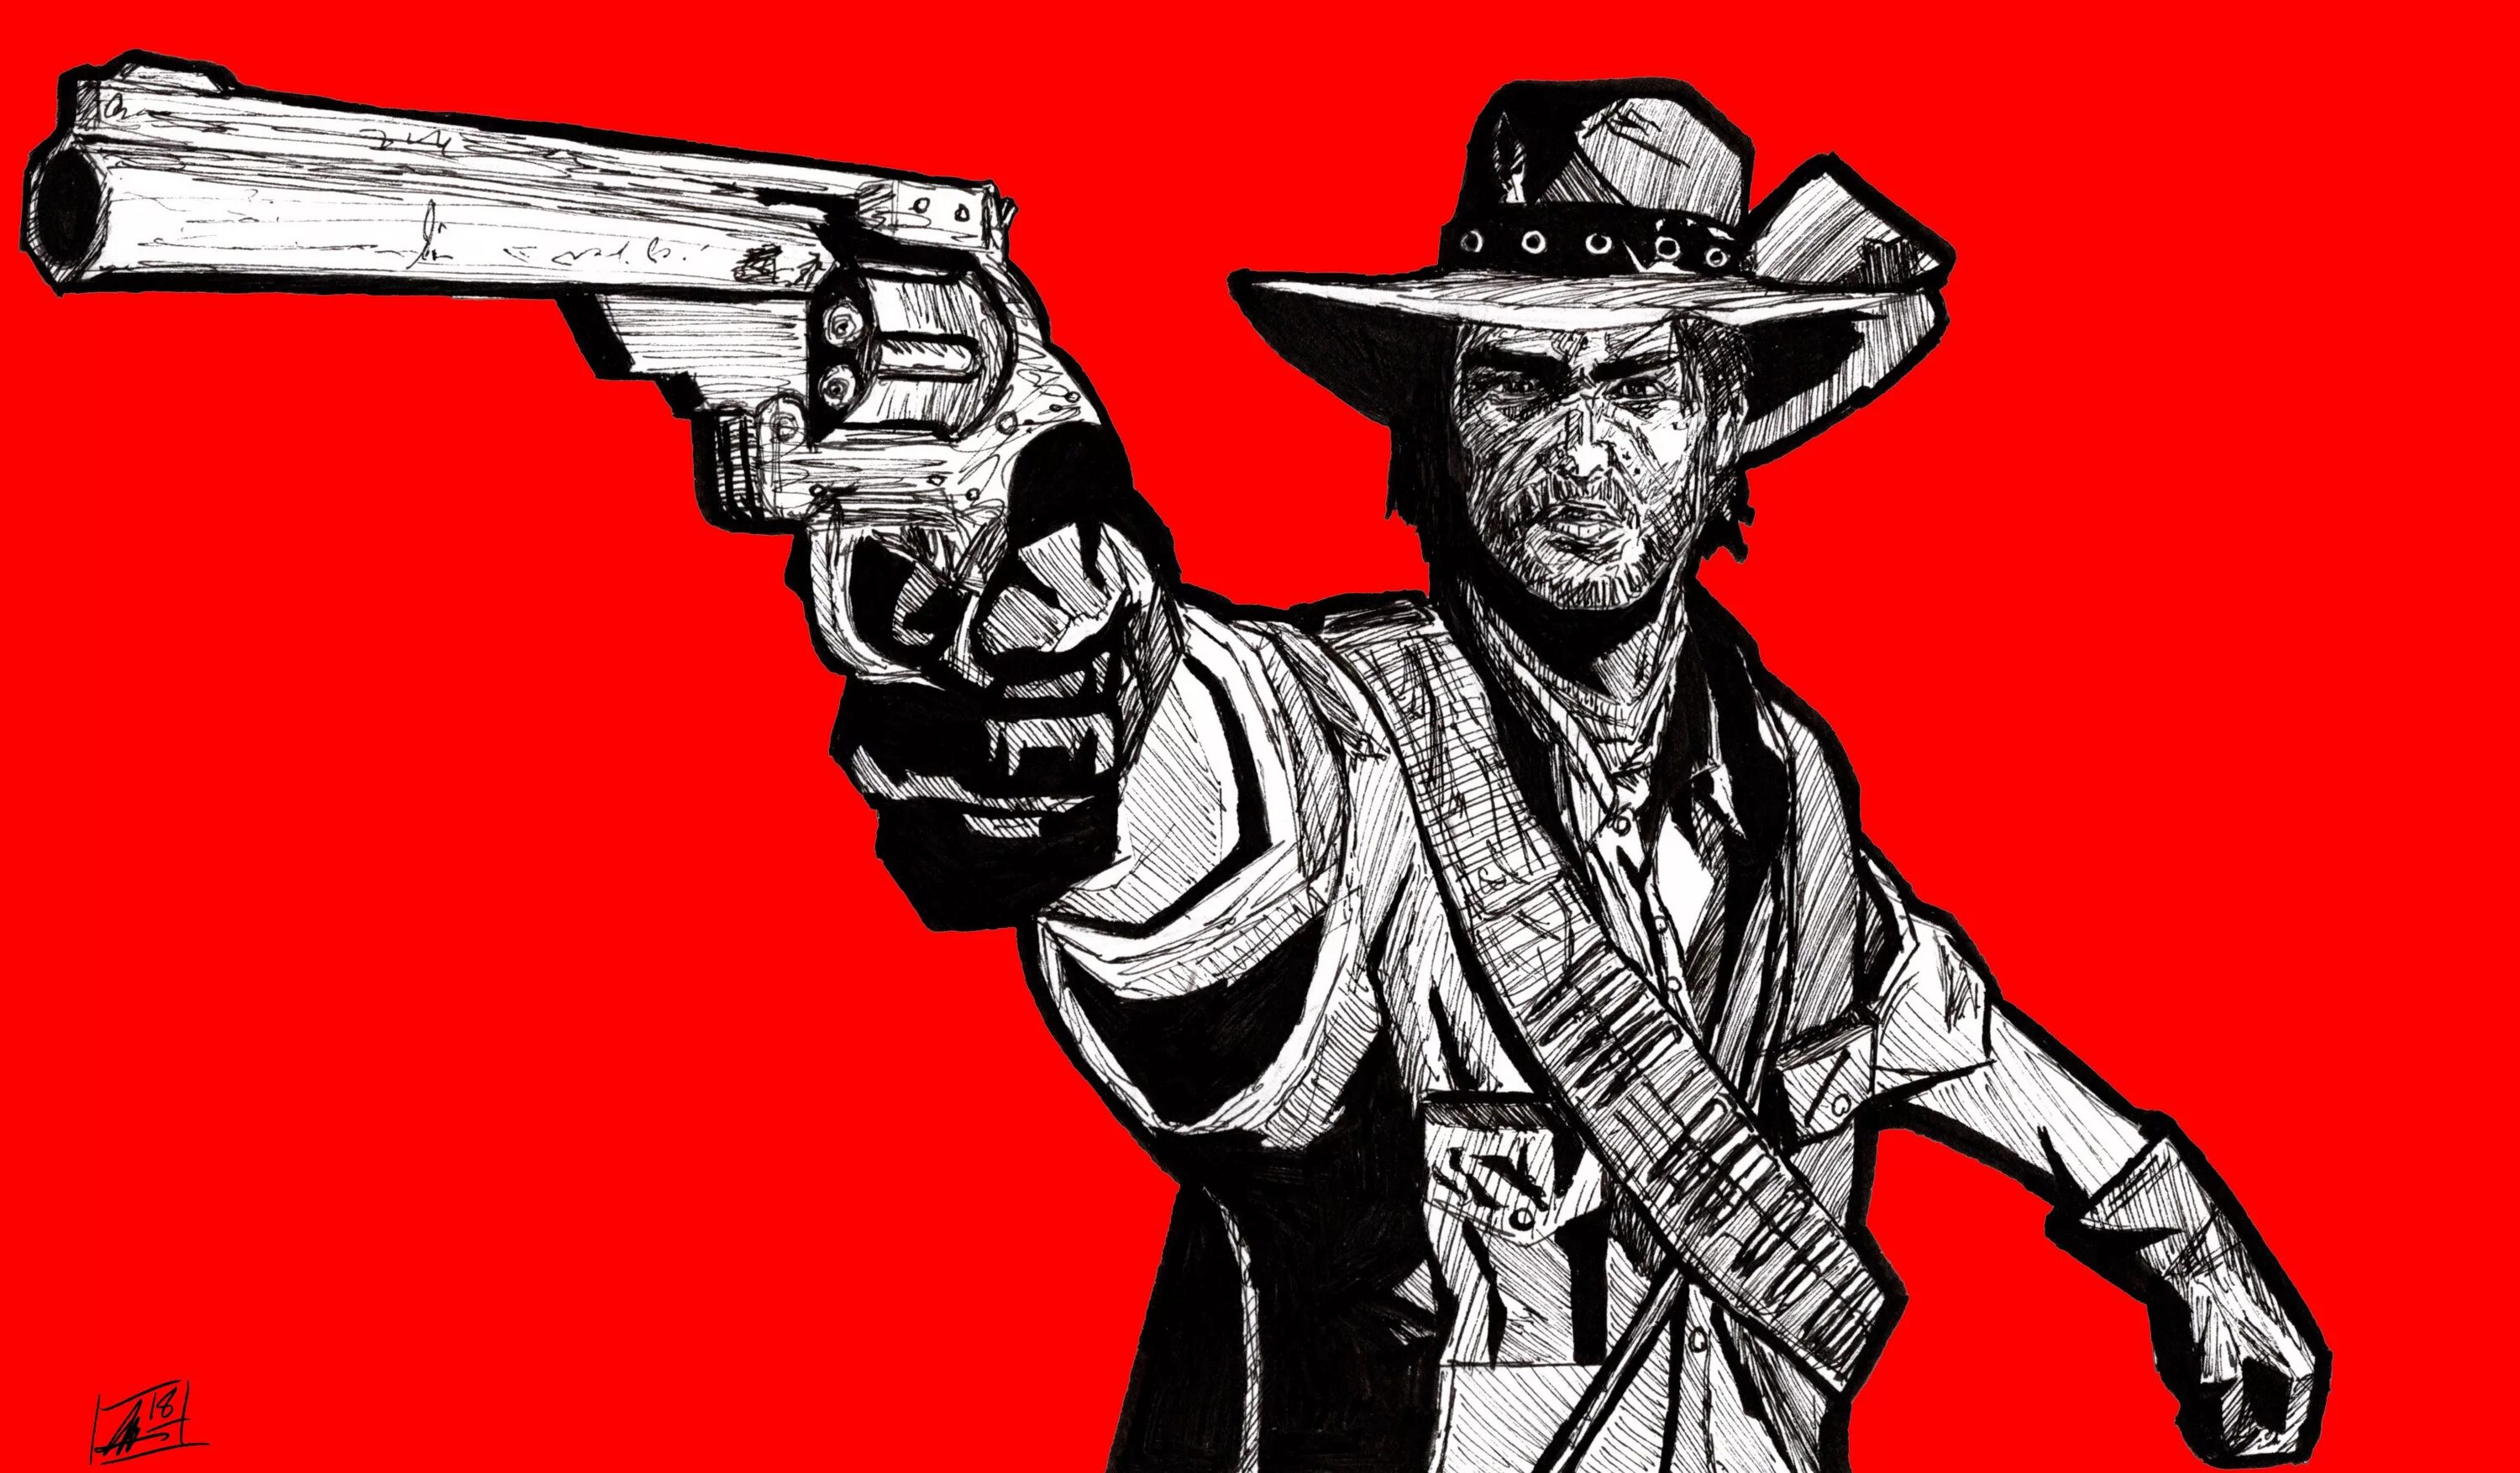 Red Dead Redemption 2 Art. Ред дед редемпшен 1. Ред дед редемпшен дед. Red Dead Redemption 2 Fan Art. Red dead redemption series